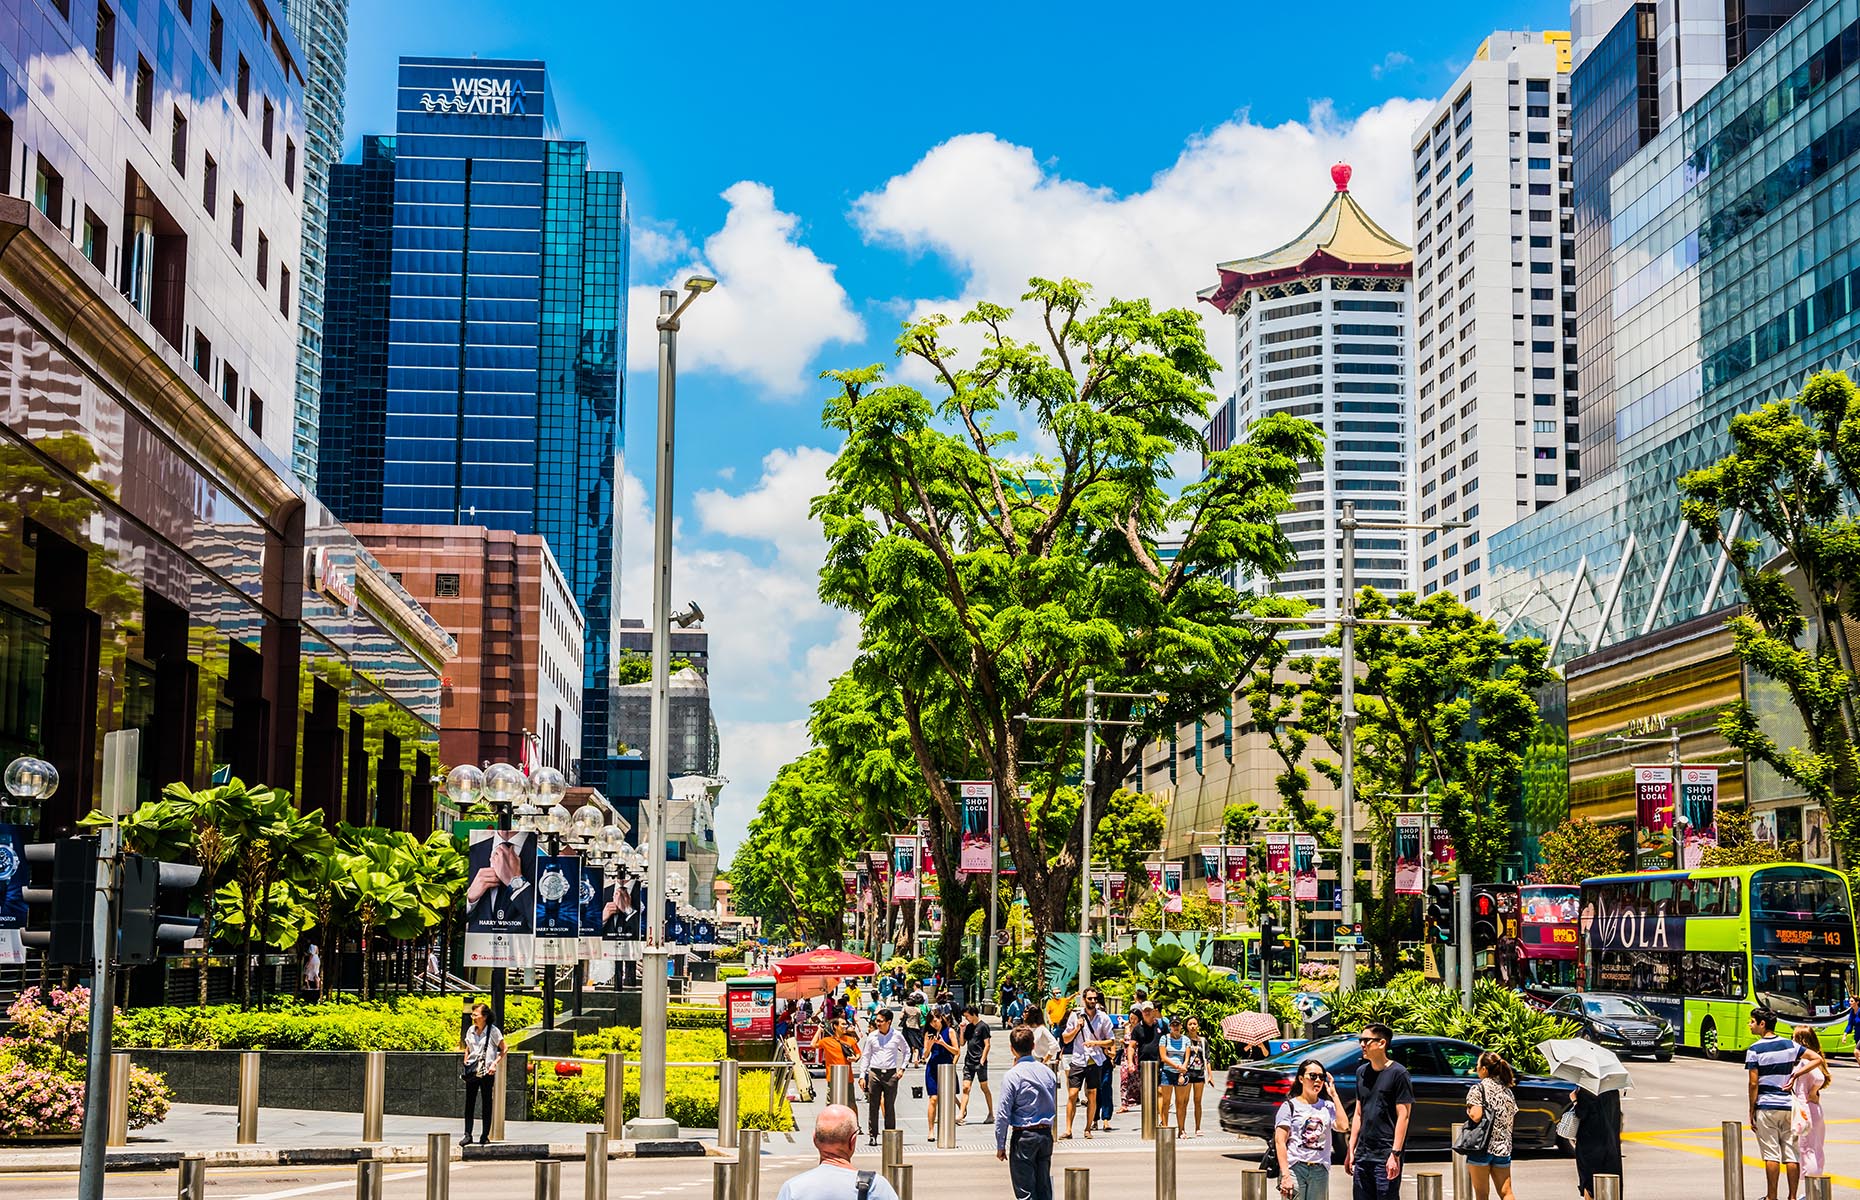 Orchard Road, the busy shopping district in Singapore (Image: monticello/Shutterstock)